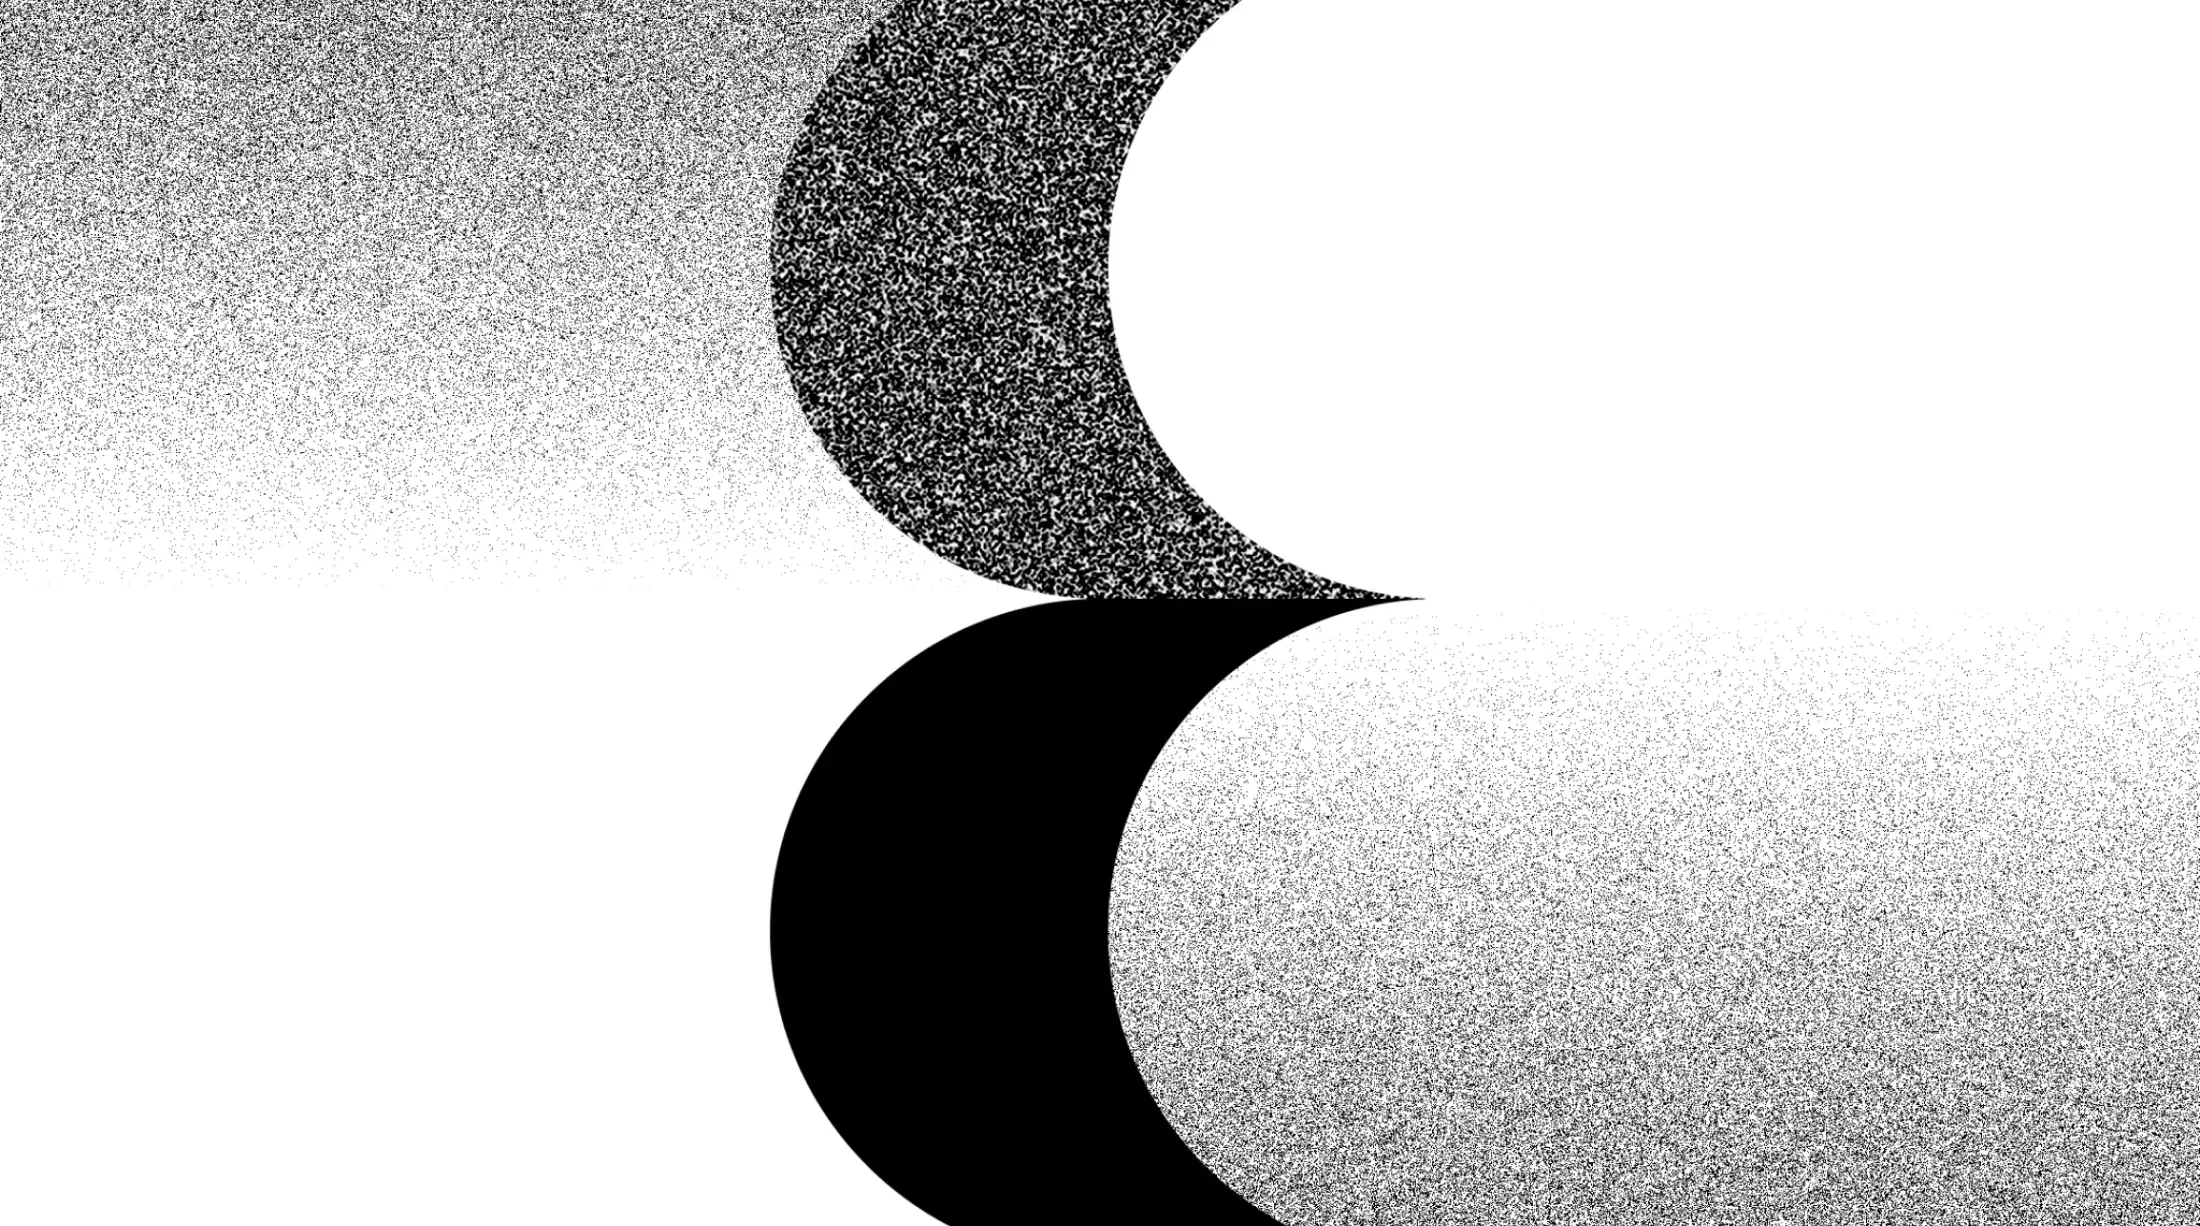 The letter 'e' made out of two crescents and gradients of grainy black and white